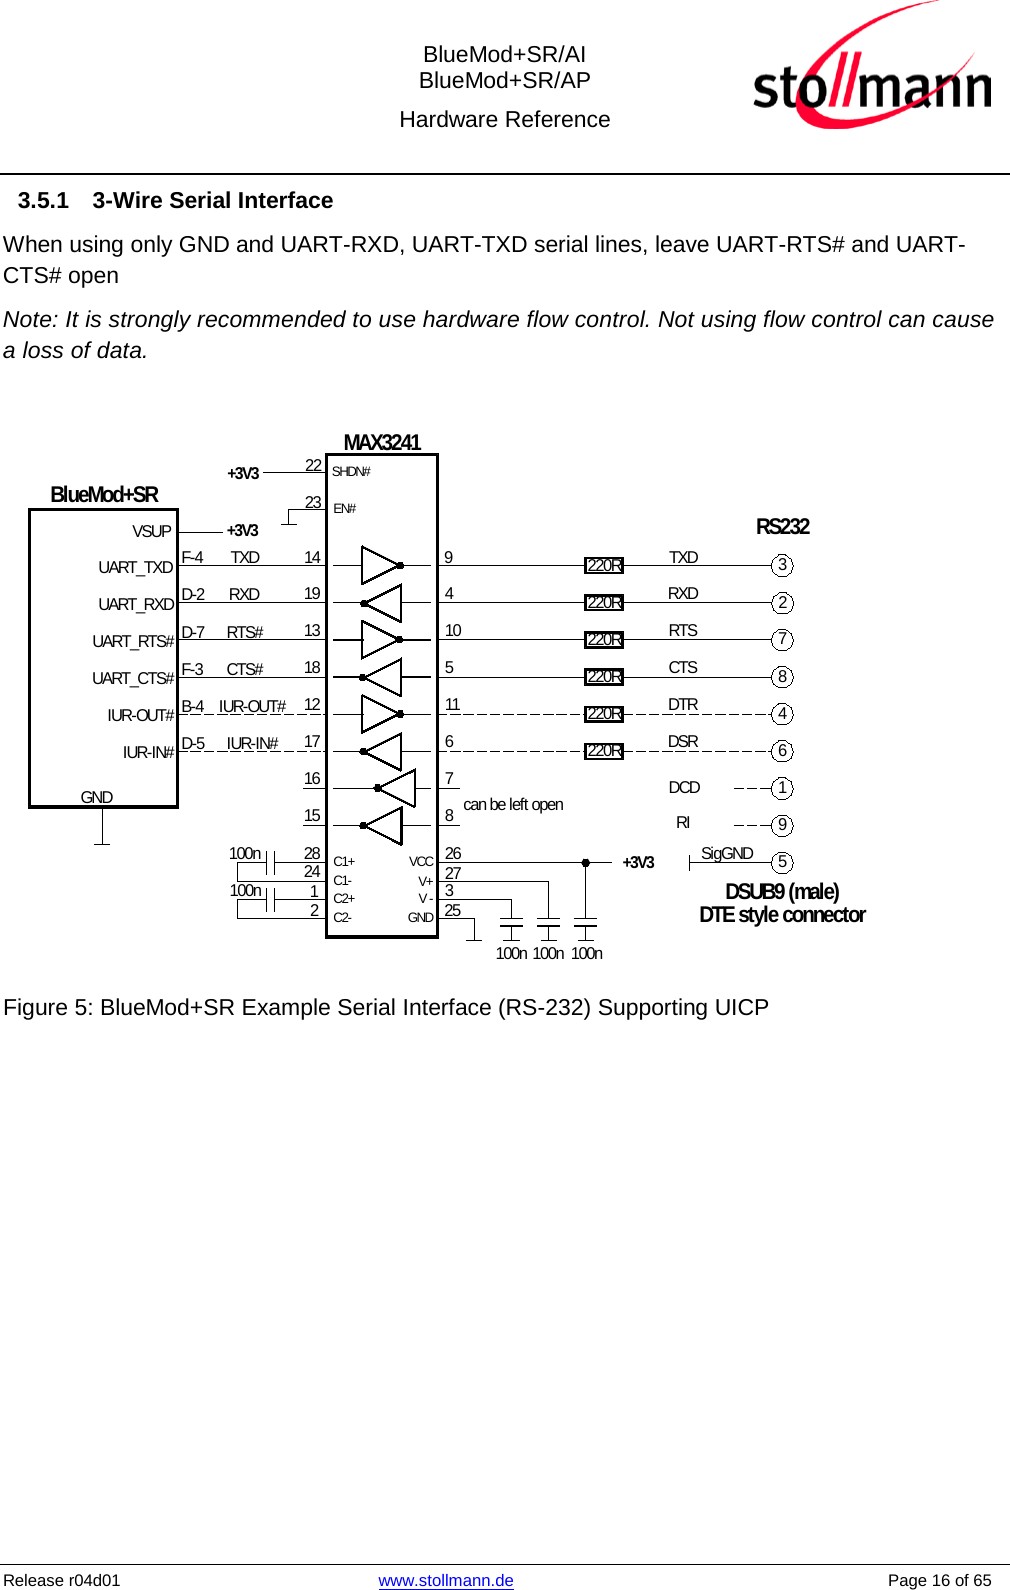 Network Interface Device Wiring Diagram from mainetreasurechest.com